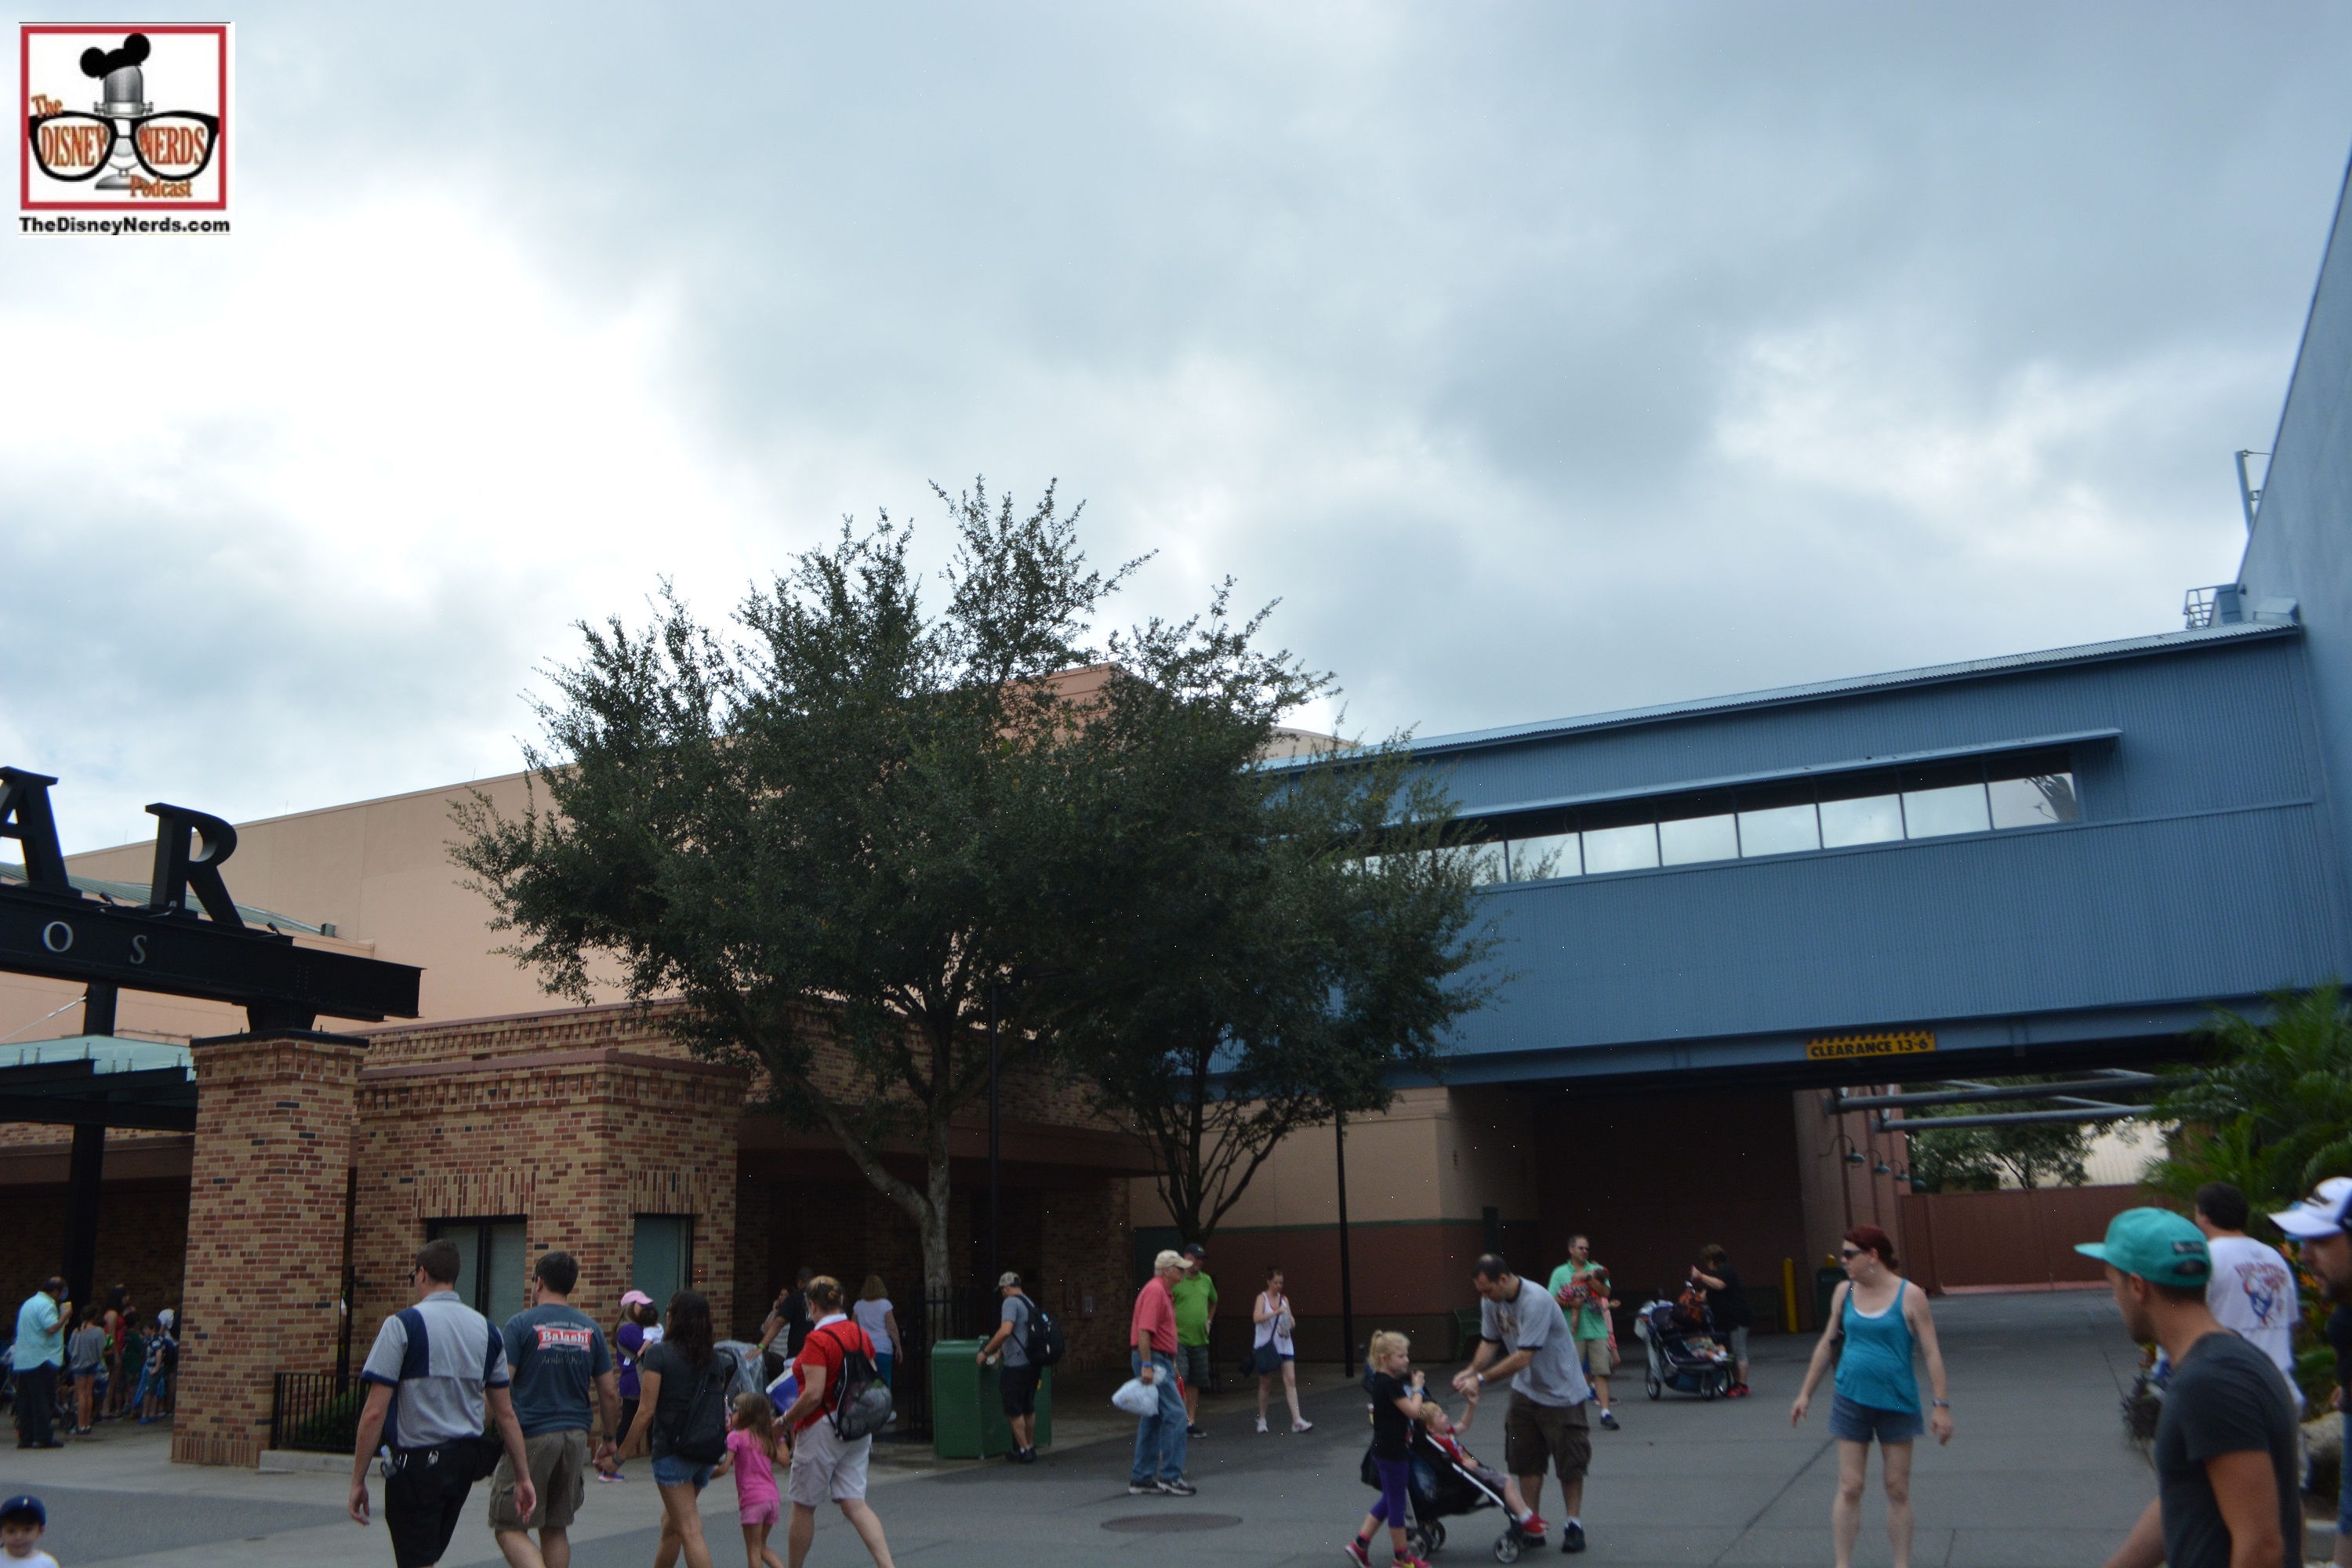 Toy Story land will be behind "Toy Story Mania" The entrance toy story mania we move, and queue from what is now the back of the building... no more squeezing through pixar place